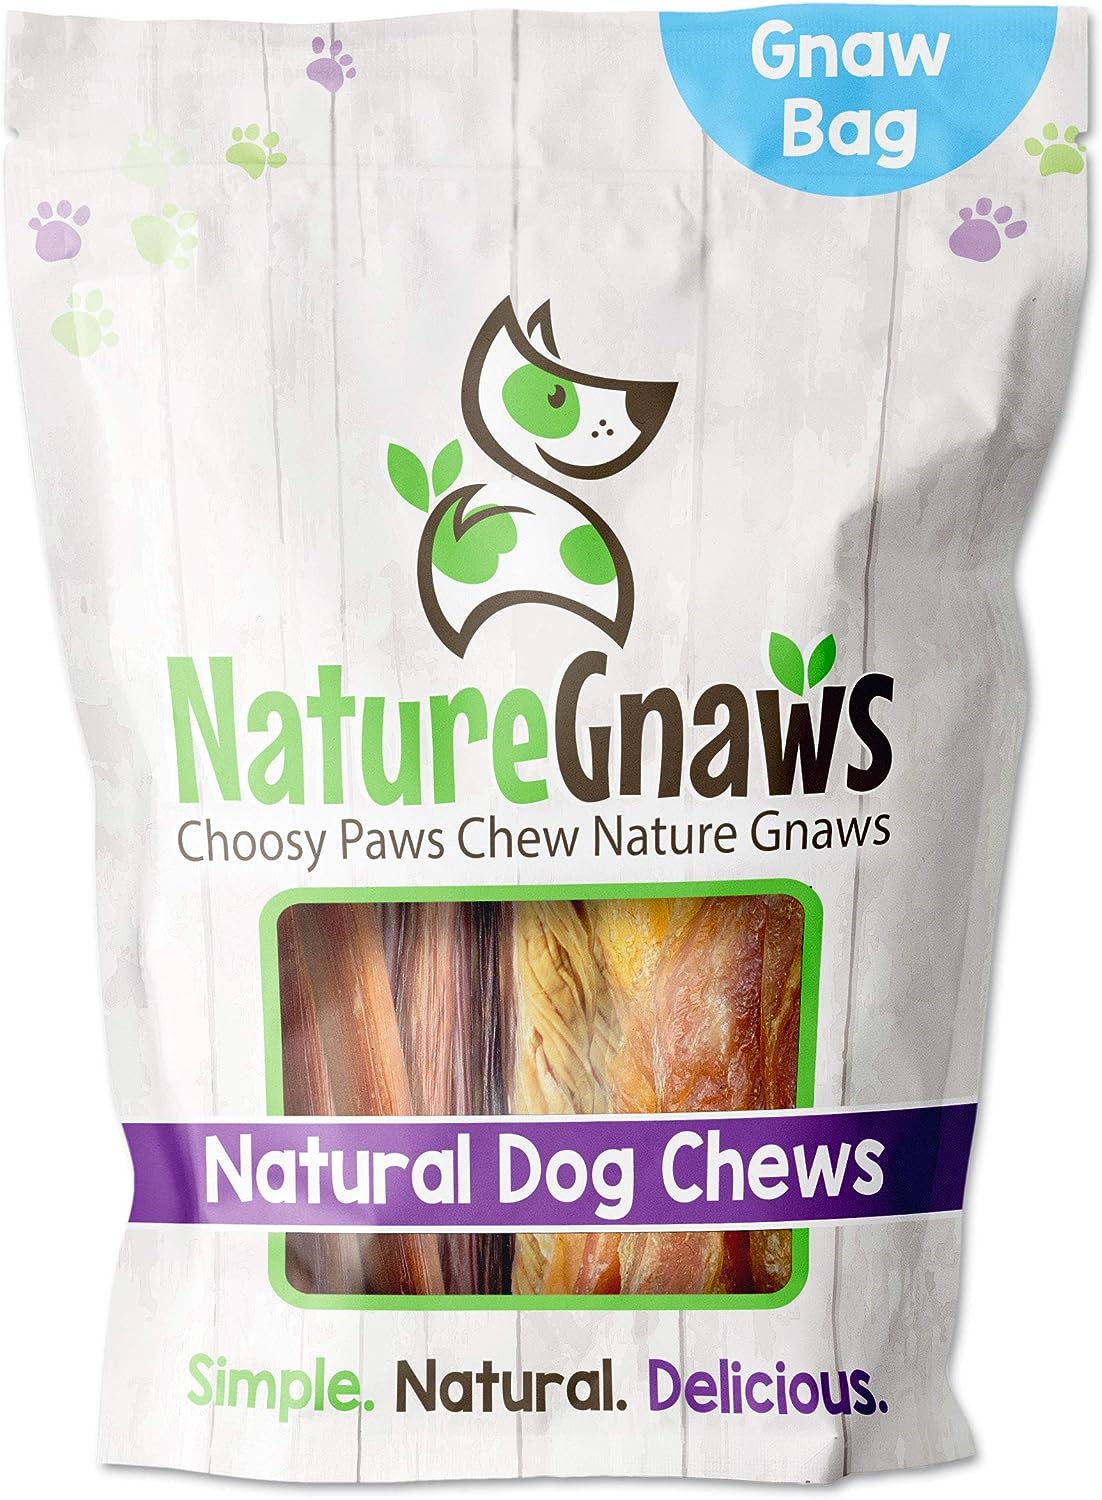 Nature Gnaws Variety Pack - Long Lasting Dog Chews for Dogs - Combo Pack of Bully Sticks, Beef Gullet and More - Dental Chews - Puppy Training Reward